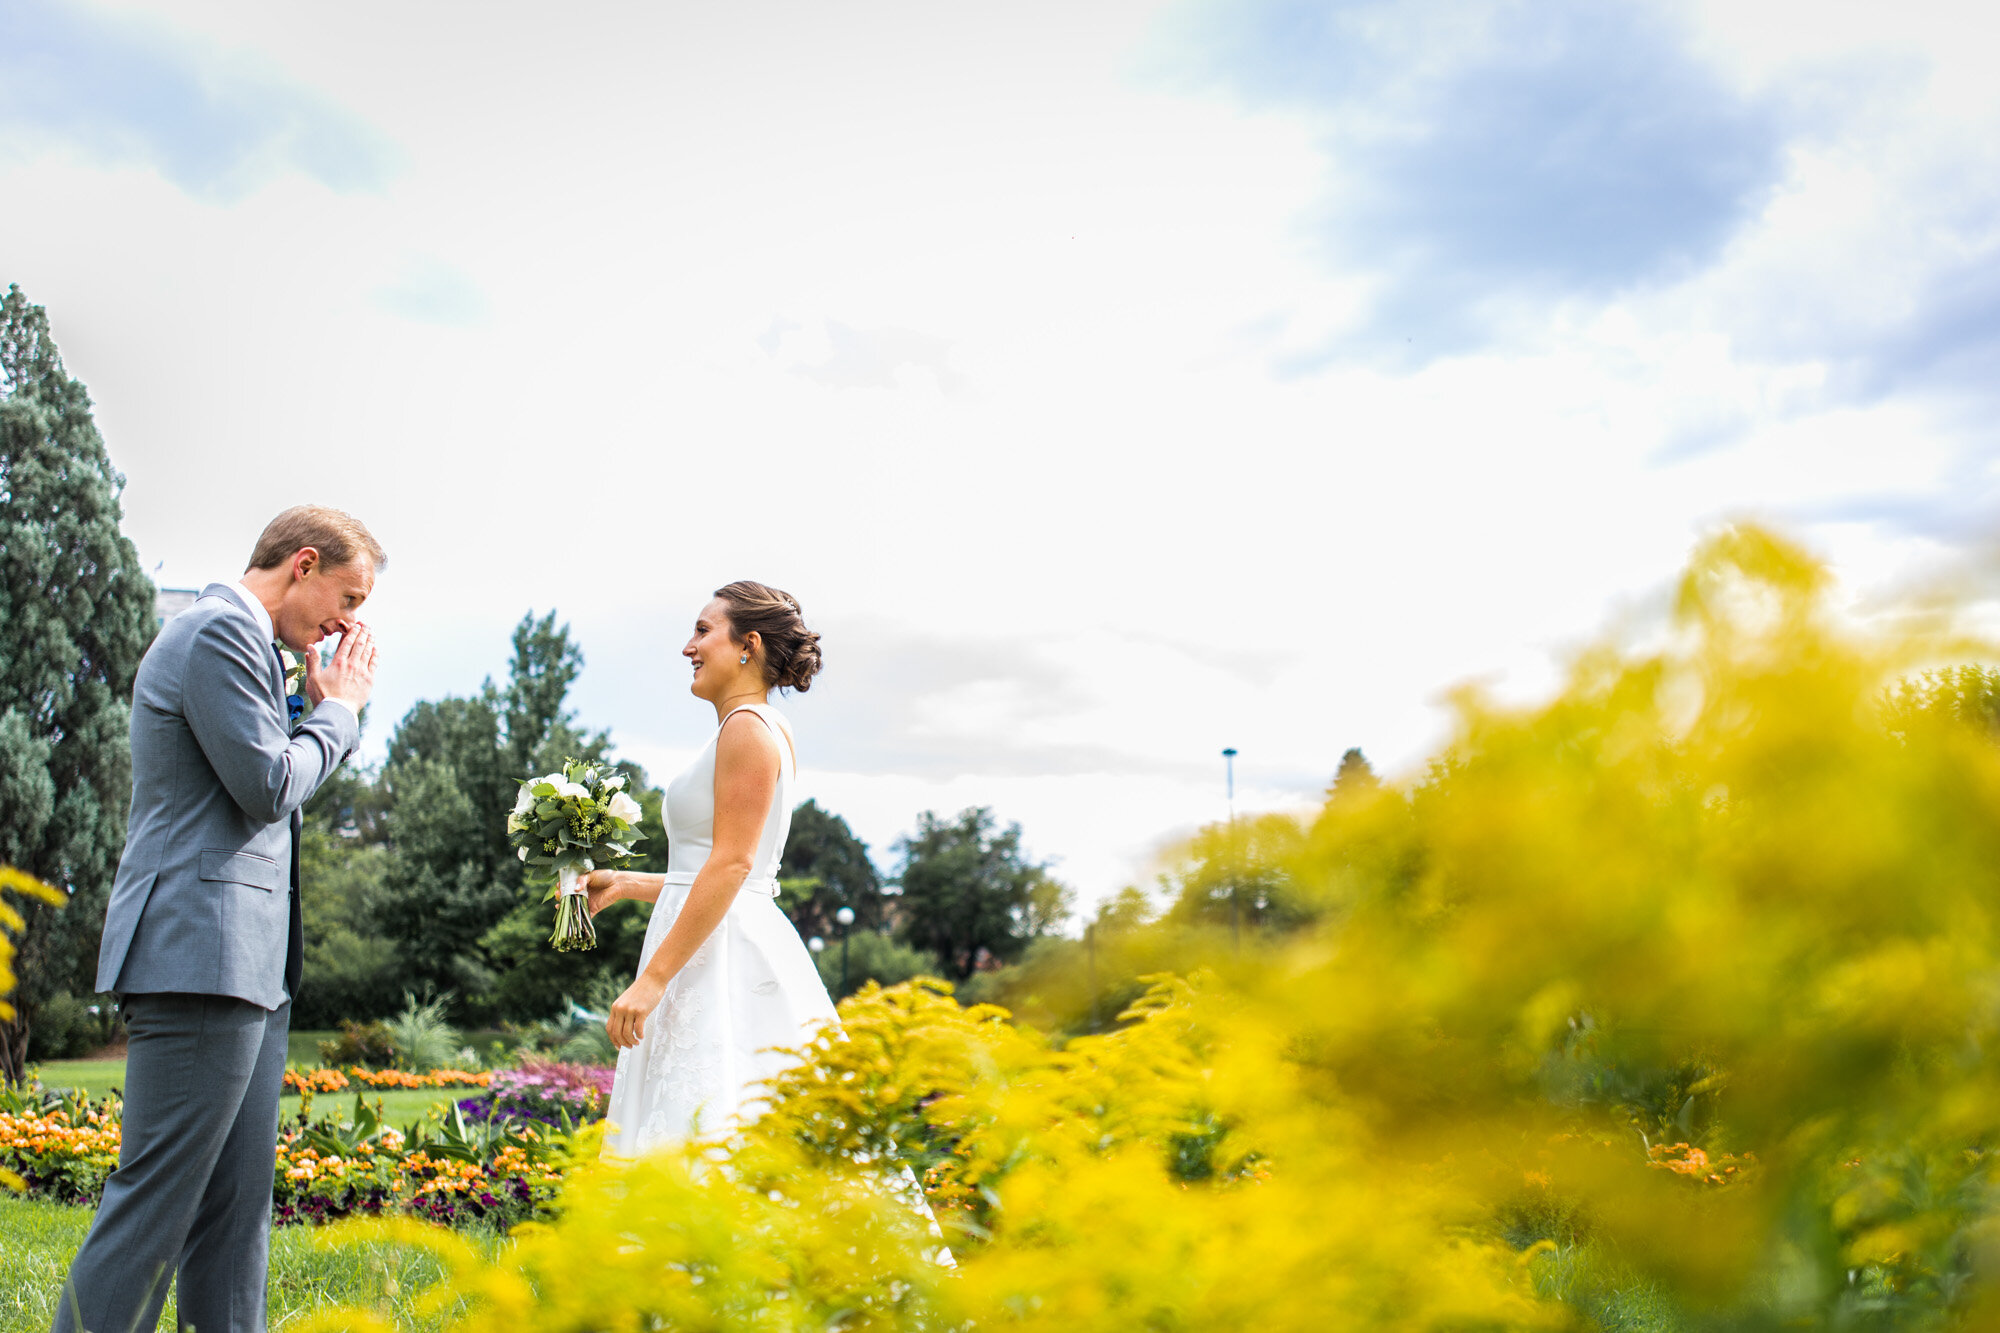 wedding-photography-timeline-denver-colorado-first-look-couples-session (11).jpg